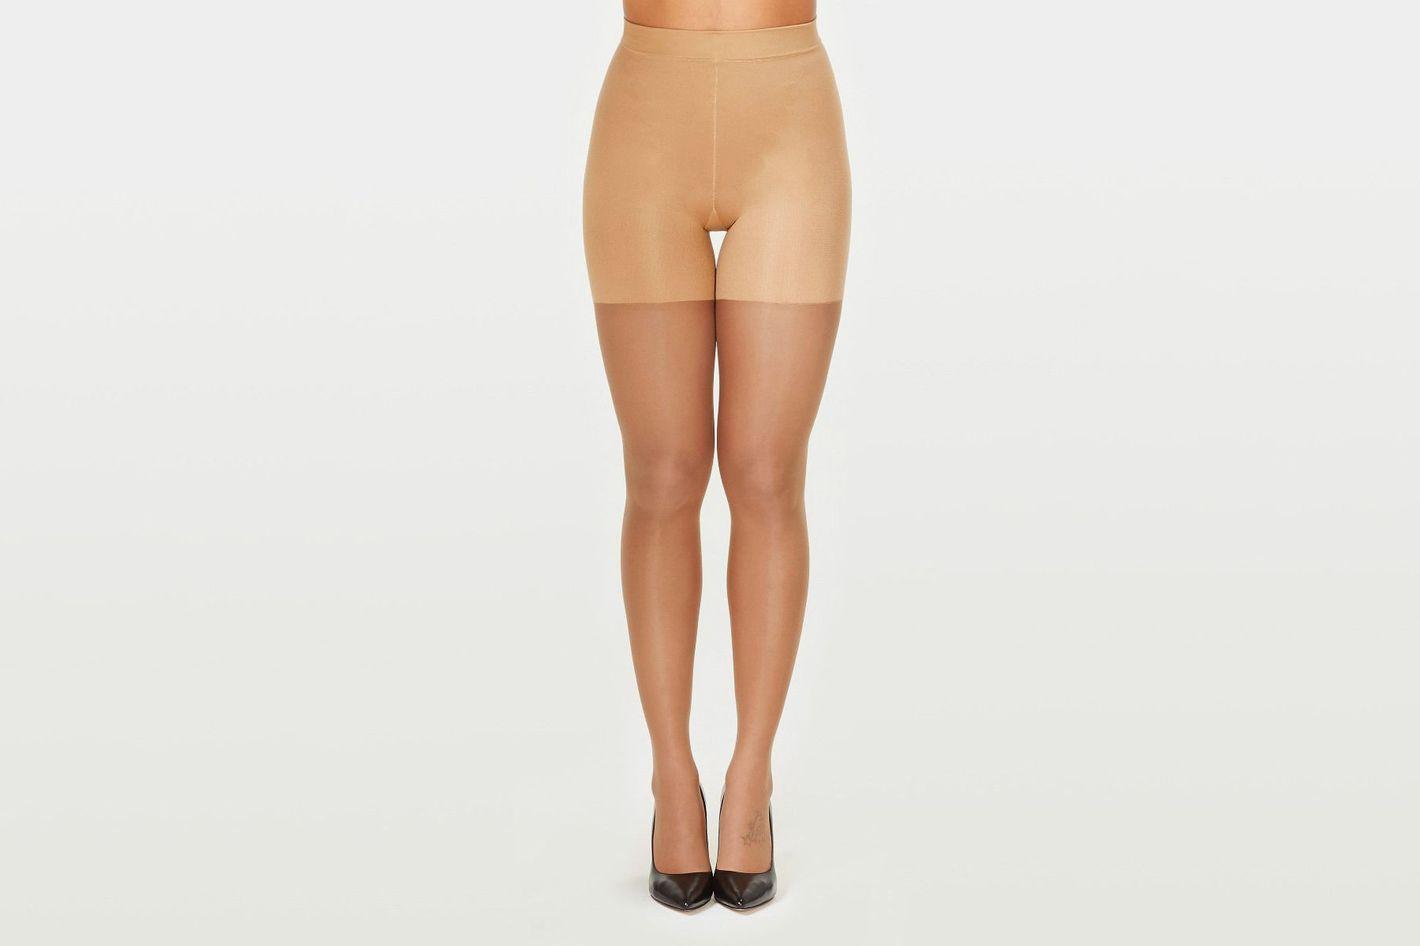 Basecamp reccomend Lifes too short to wear pantyhose